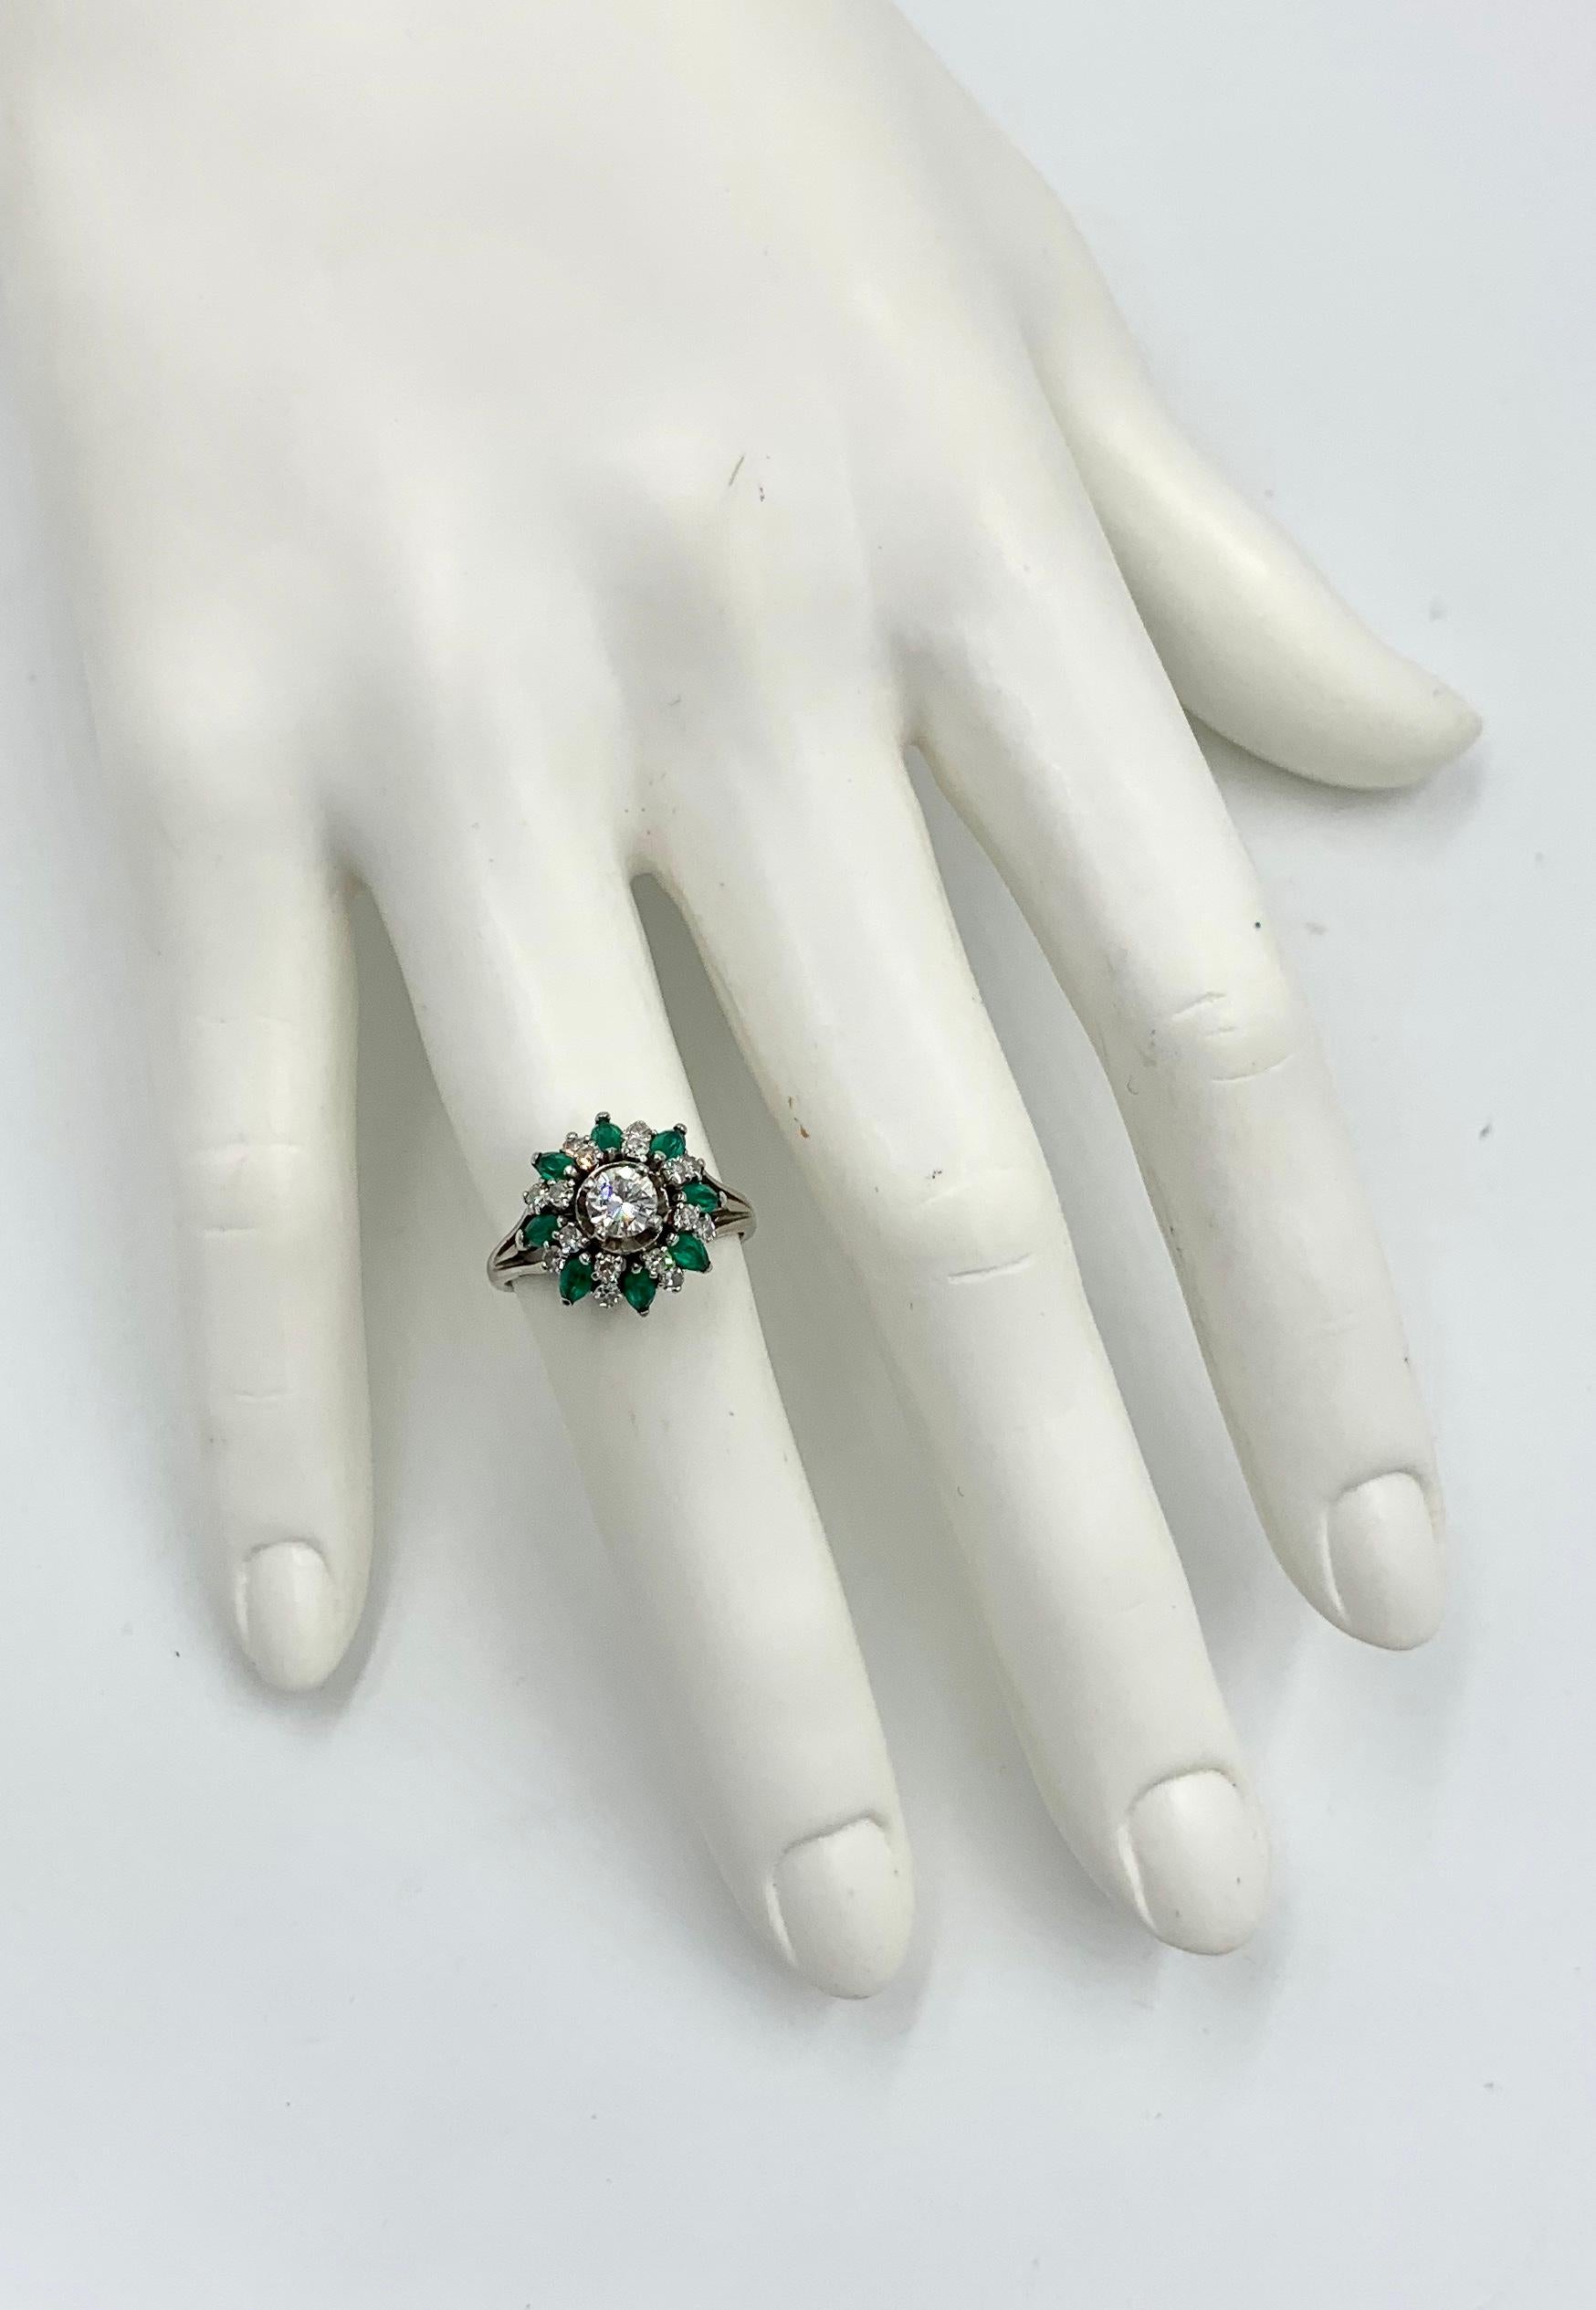 A stunning antique Diamond Emerald bombe cluster Ring.  The ring features a central Round Brilliant Cut Diamond of .34 Carats. This gorgeous diamond is surrounded by 16 sparkling round diamonds.  The diamonds are H-I color, very white and just